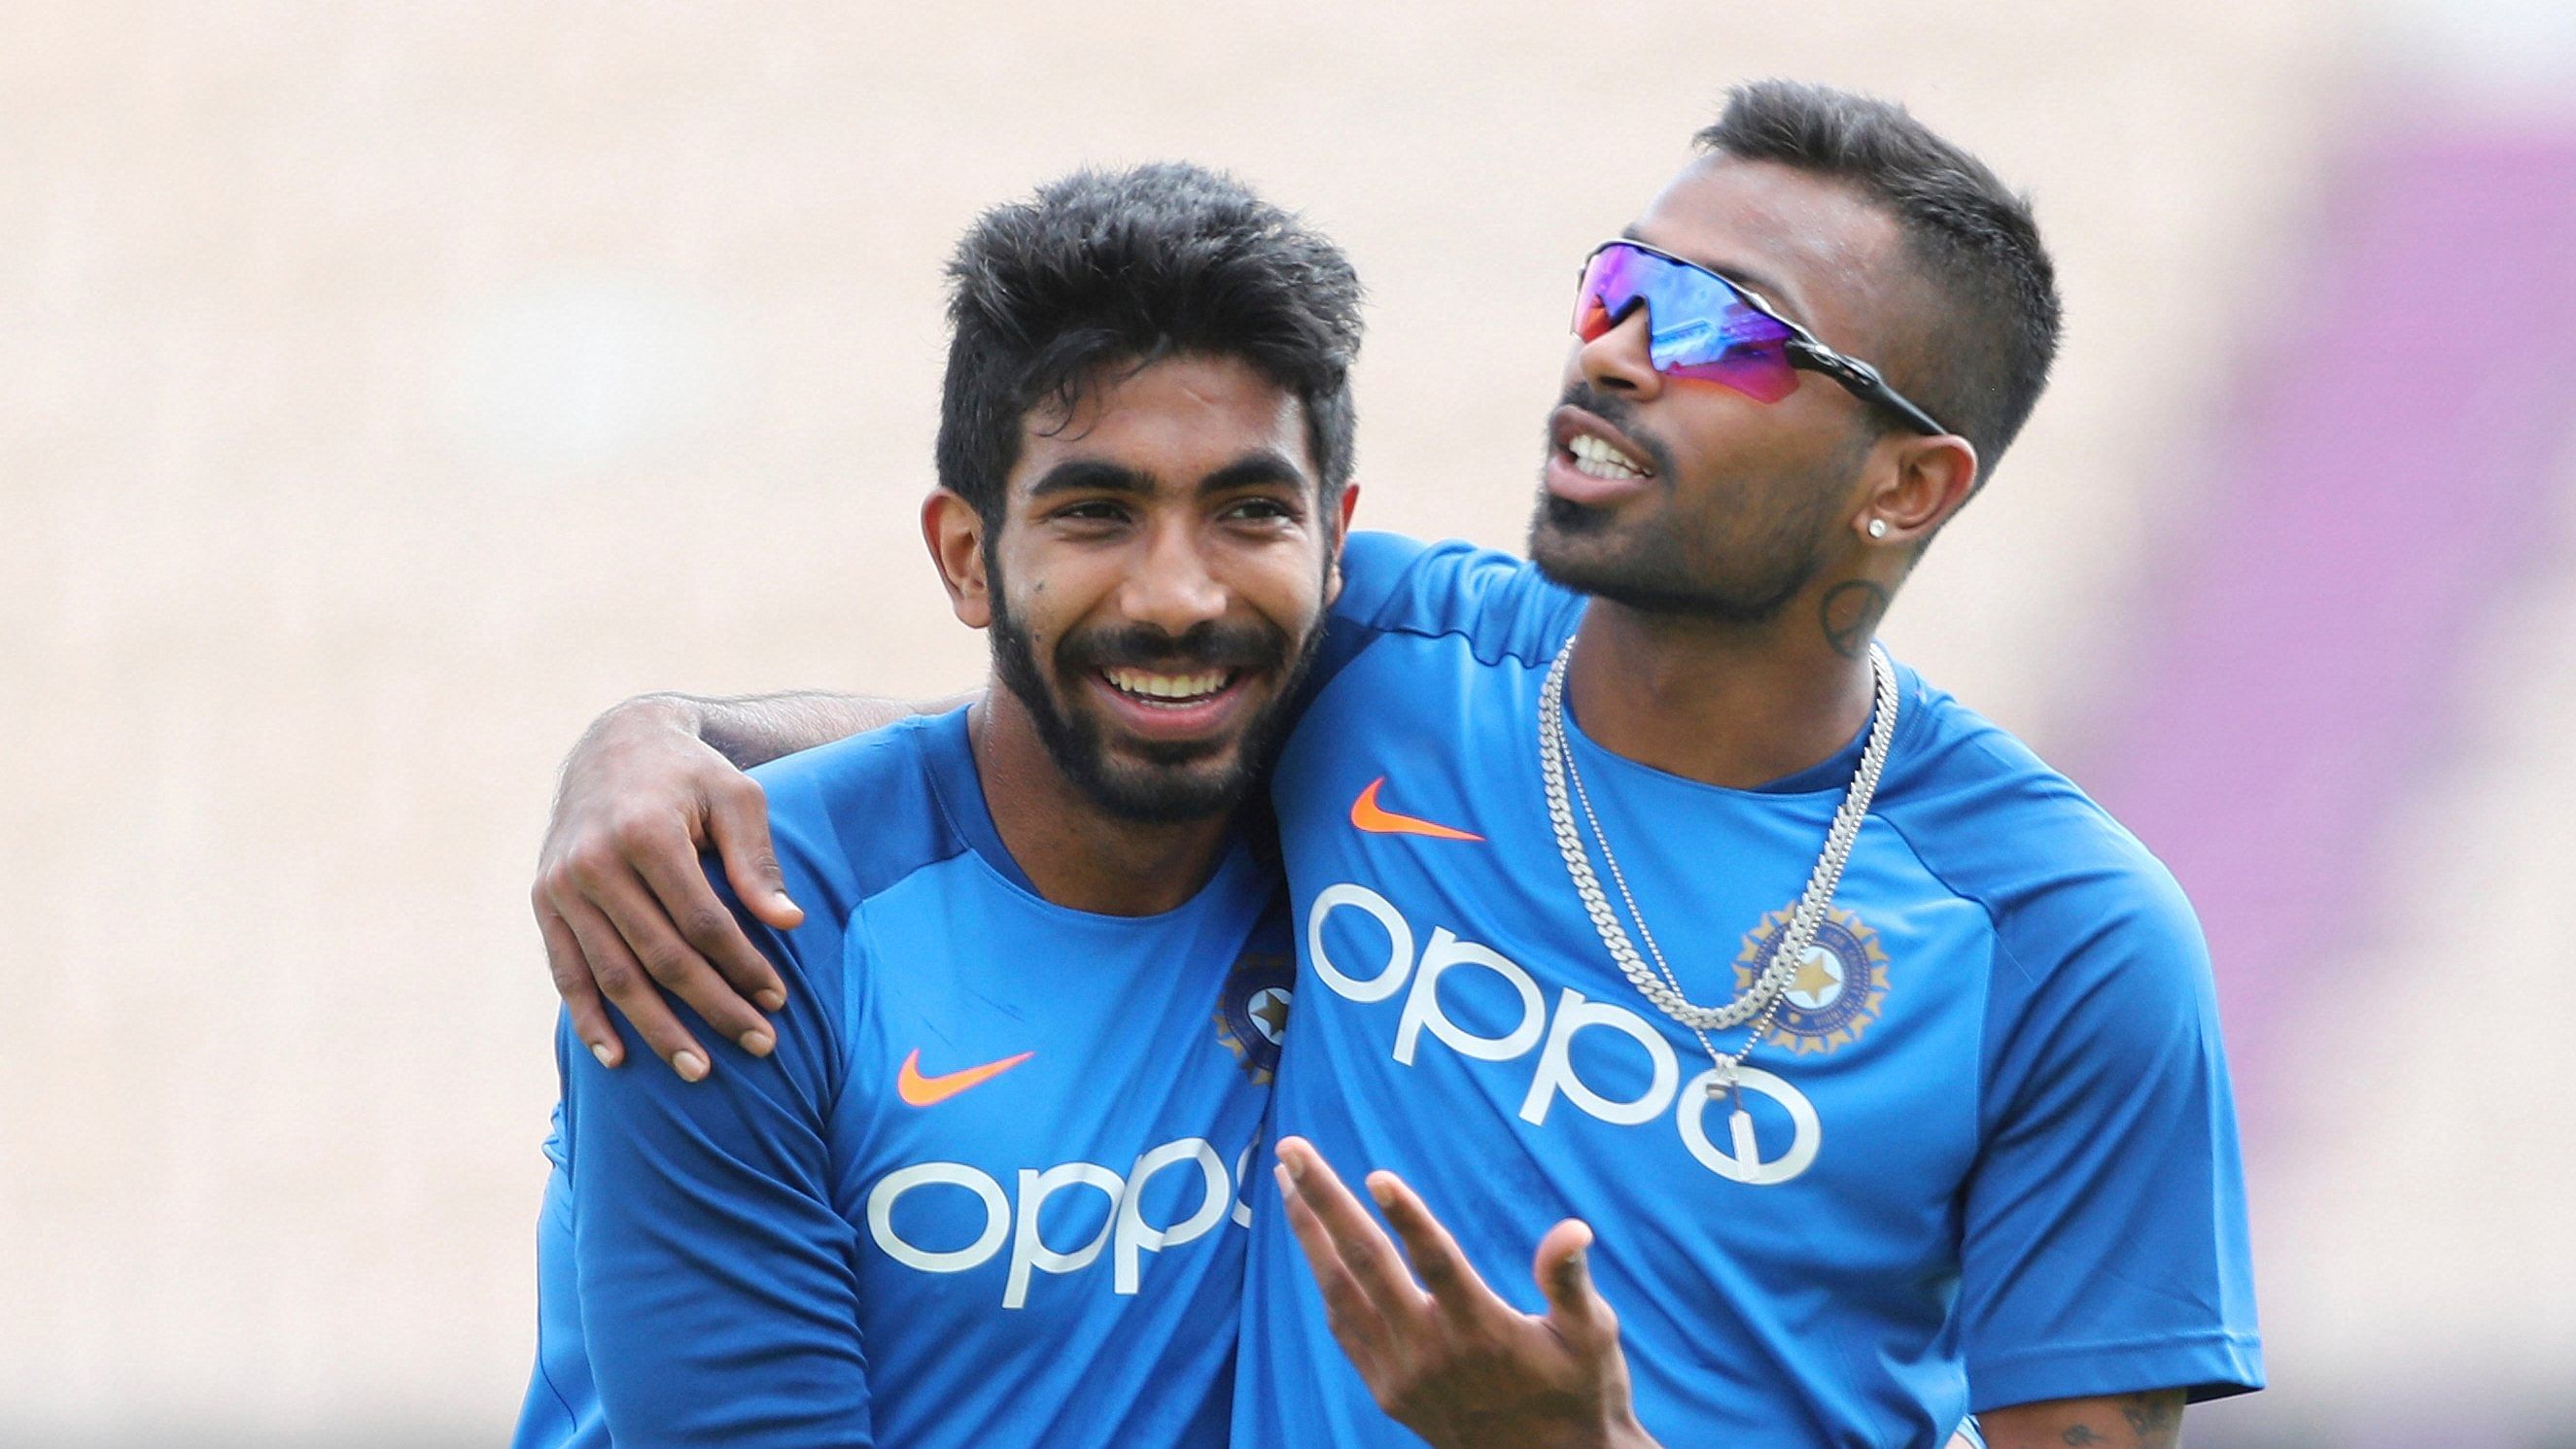 Ponting reckons Pandya is arguably the best T20 all-rounder in the world while Bumrah is the most complete bowler across the three formats. Credit: AP Photo